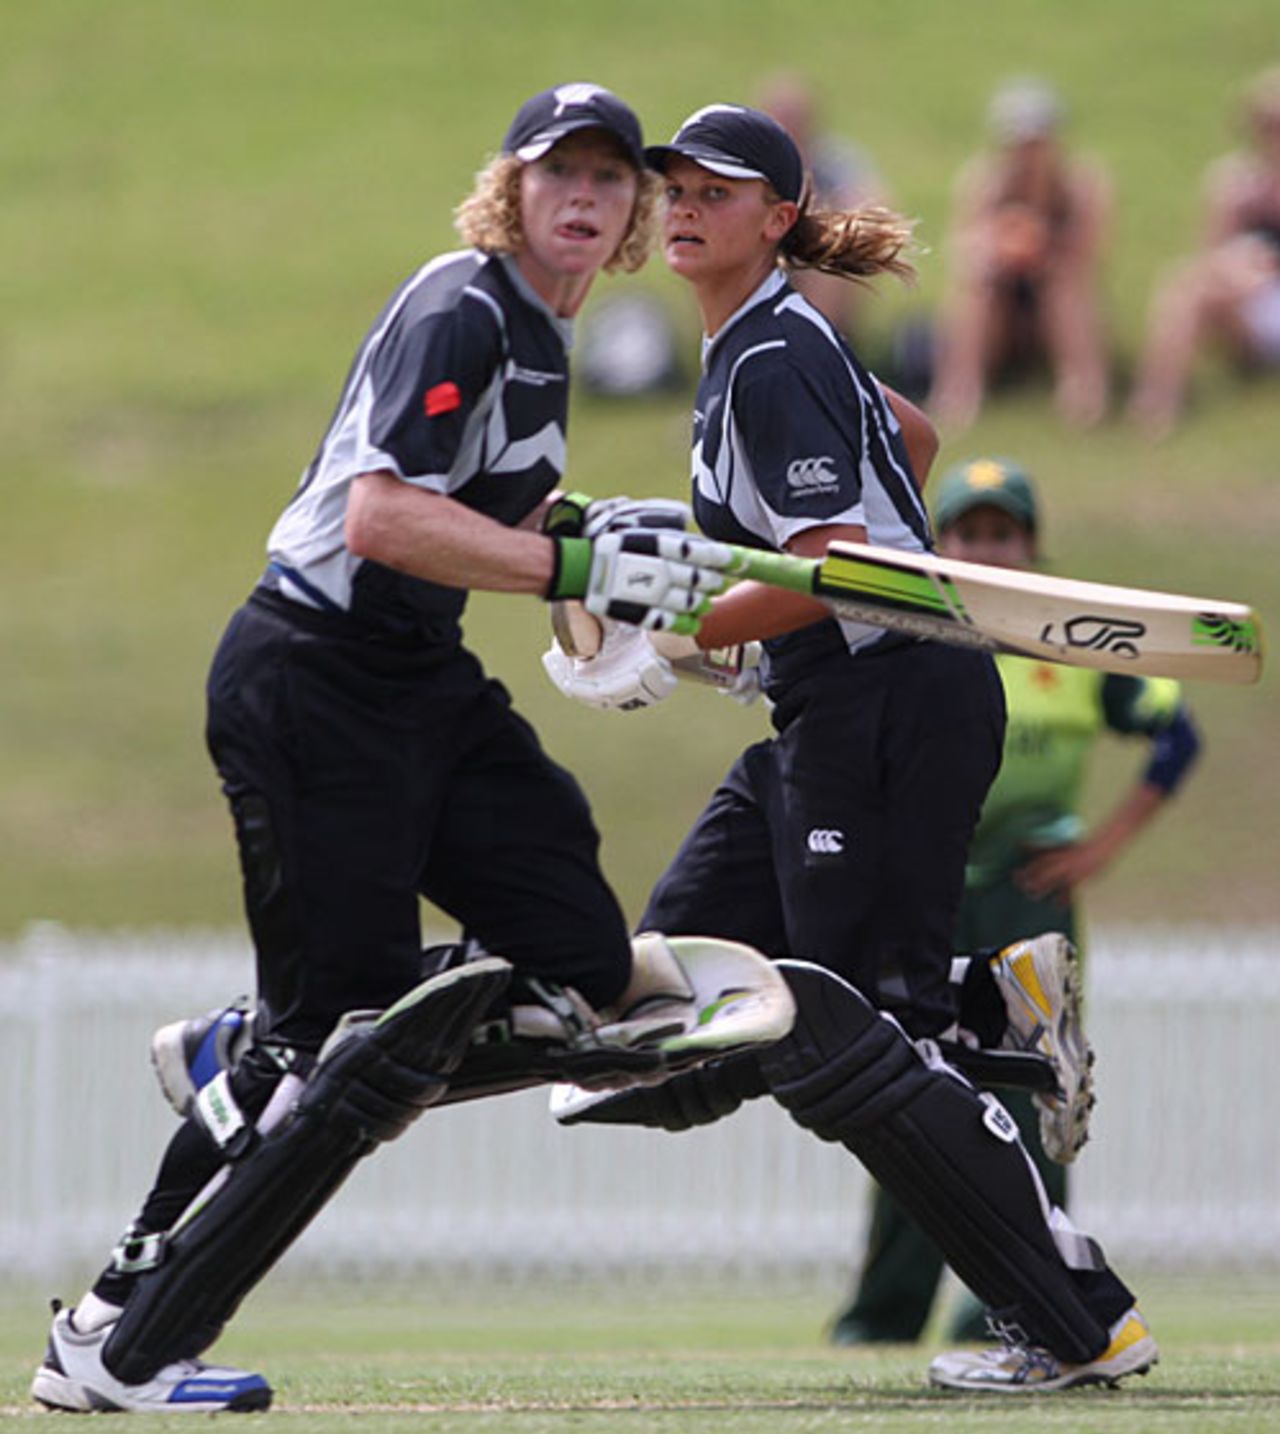 Haidee Tiffen and Suzie Bates added a record 262 together, New Zealand v Pakistan, women's World Cup, Super Six, Drummoyne Oval, Sydney, March 19, 2009